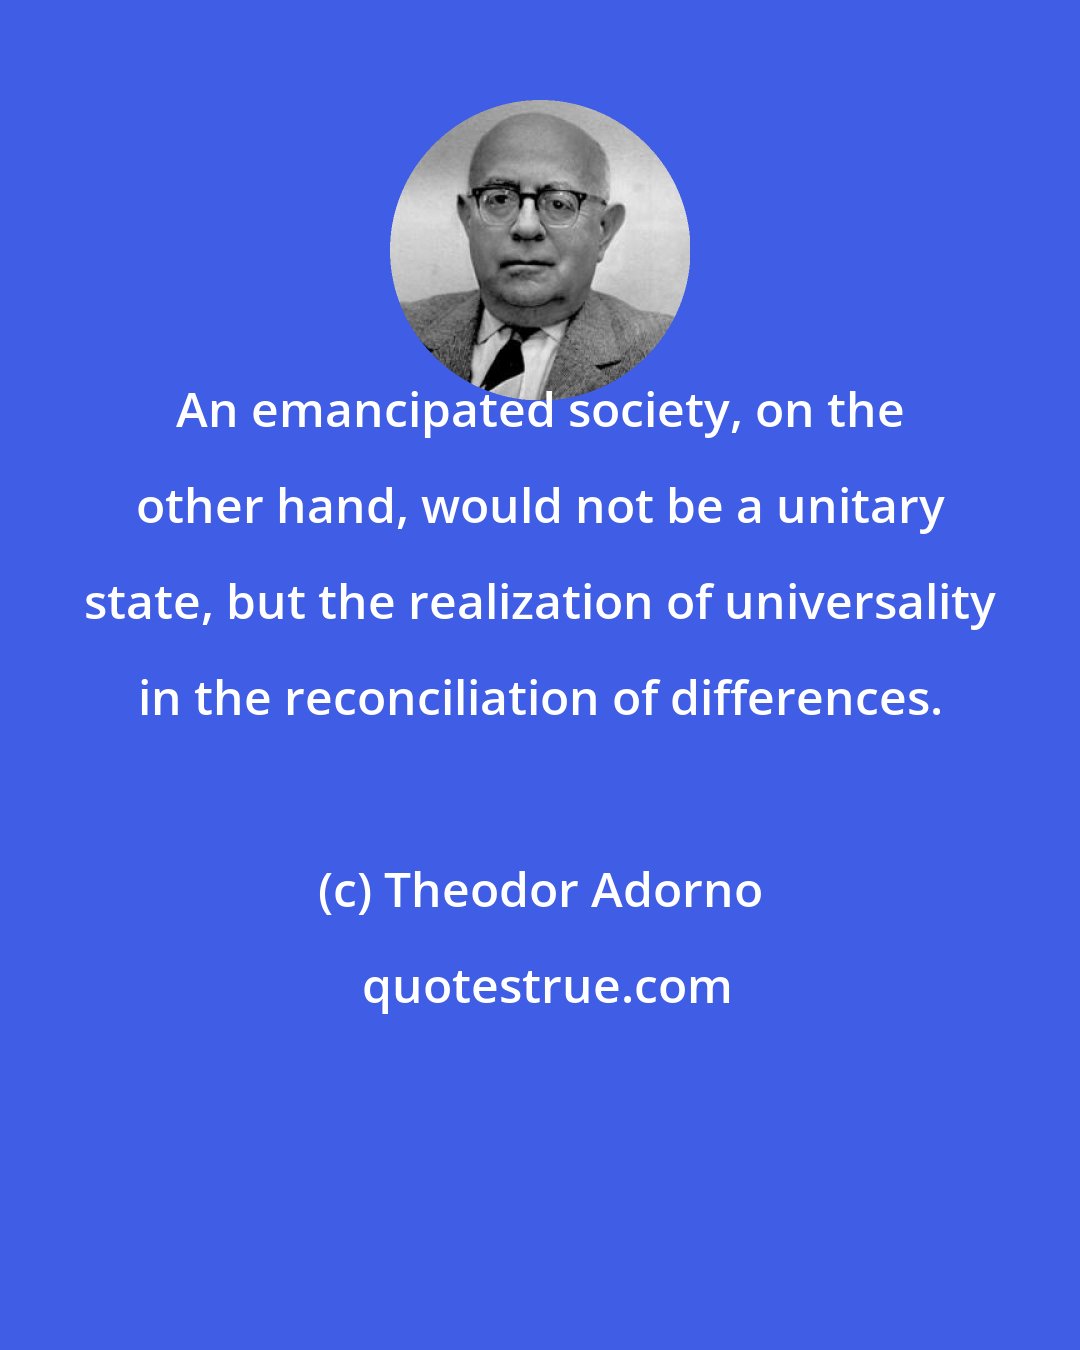 Theodor Adorno: An emancipated society, on the other hand, would not be a unitary state, but the realization of universality in the reconciliation of differences.